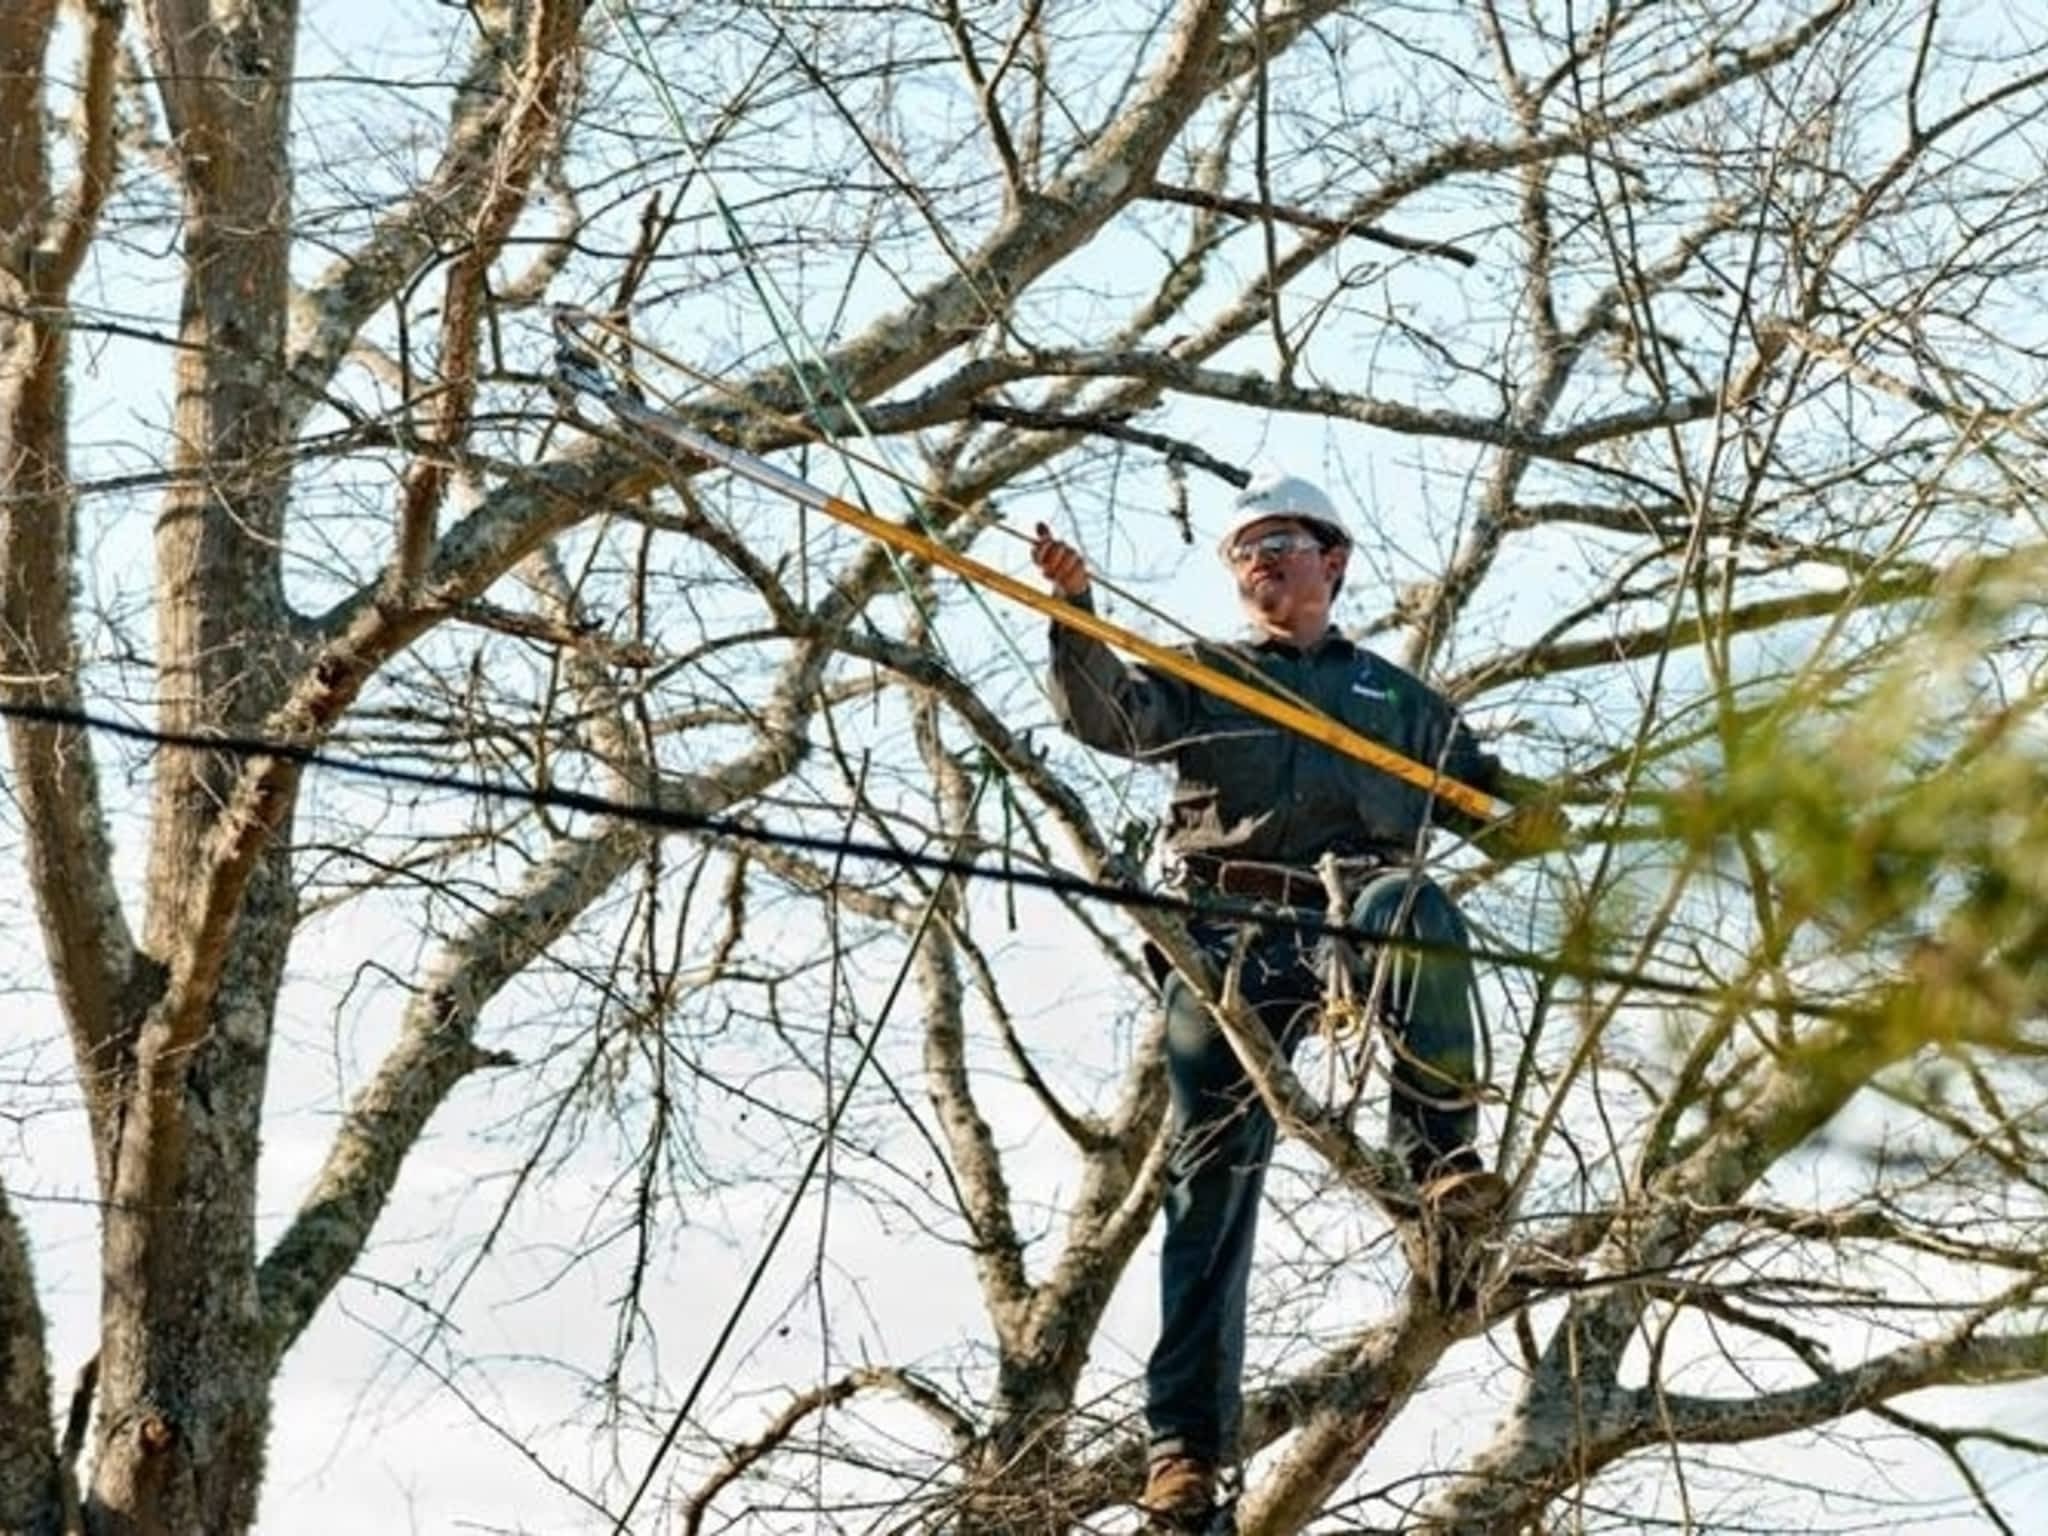 photo Davey Tree Expert Co Of Canada Limited